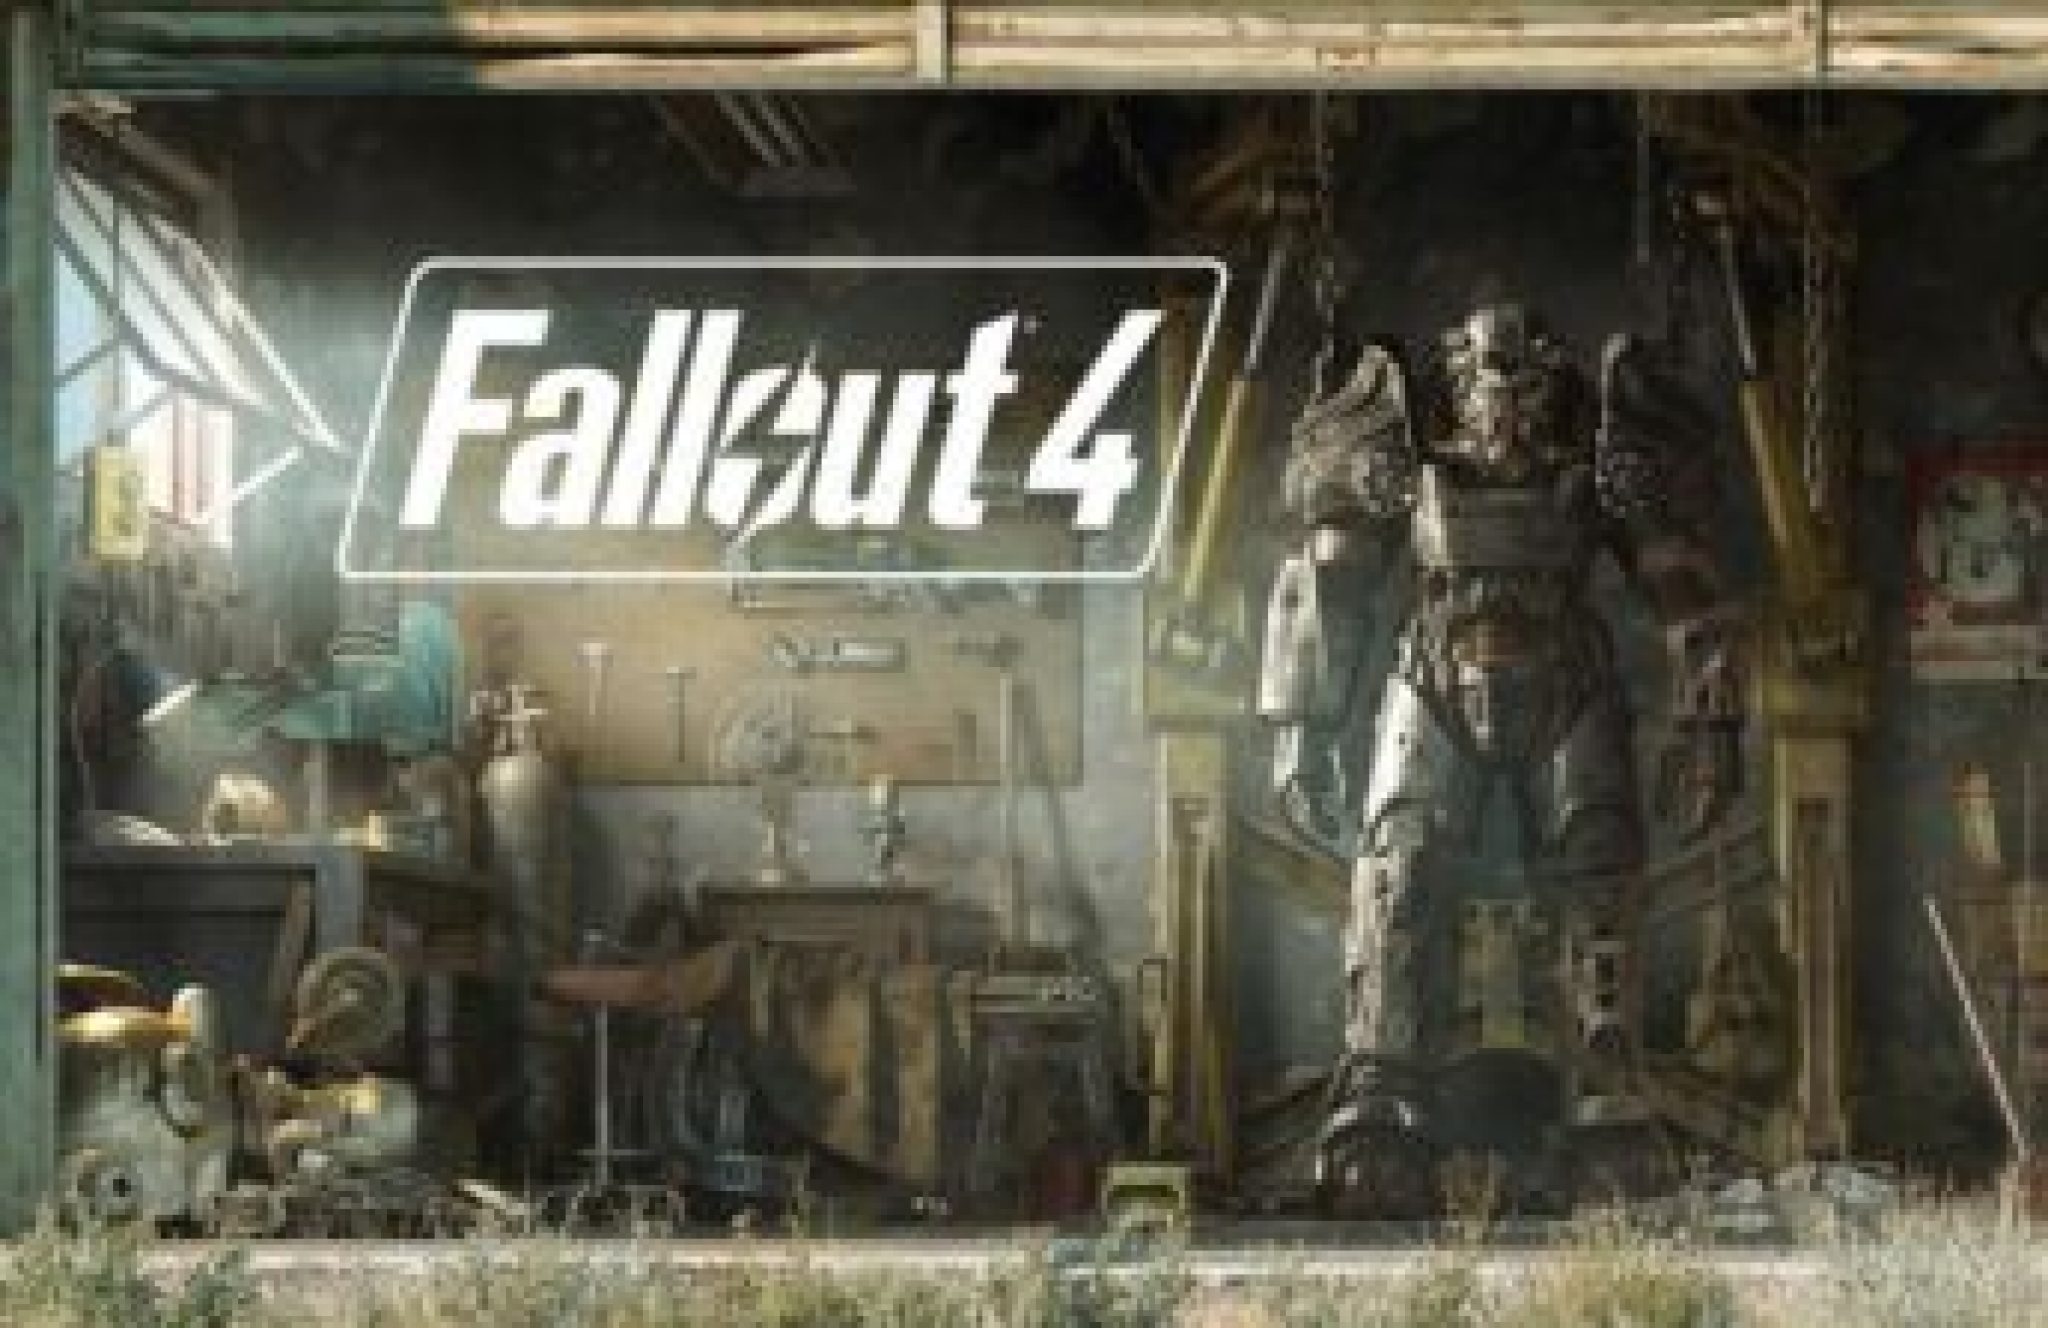 fallout 4 pc download size